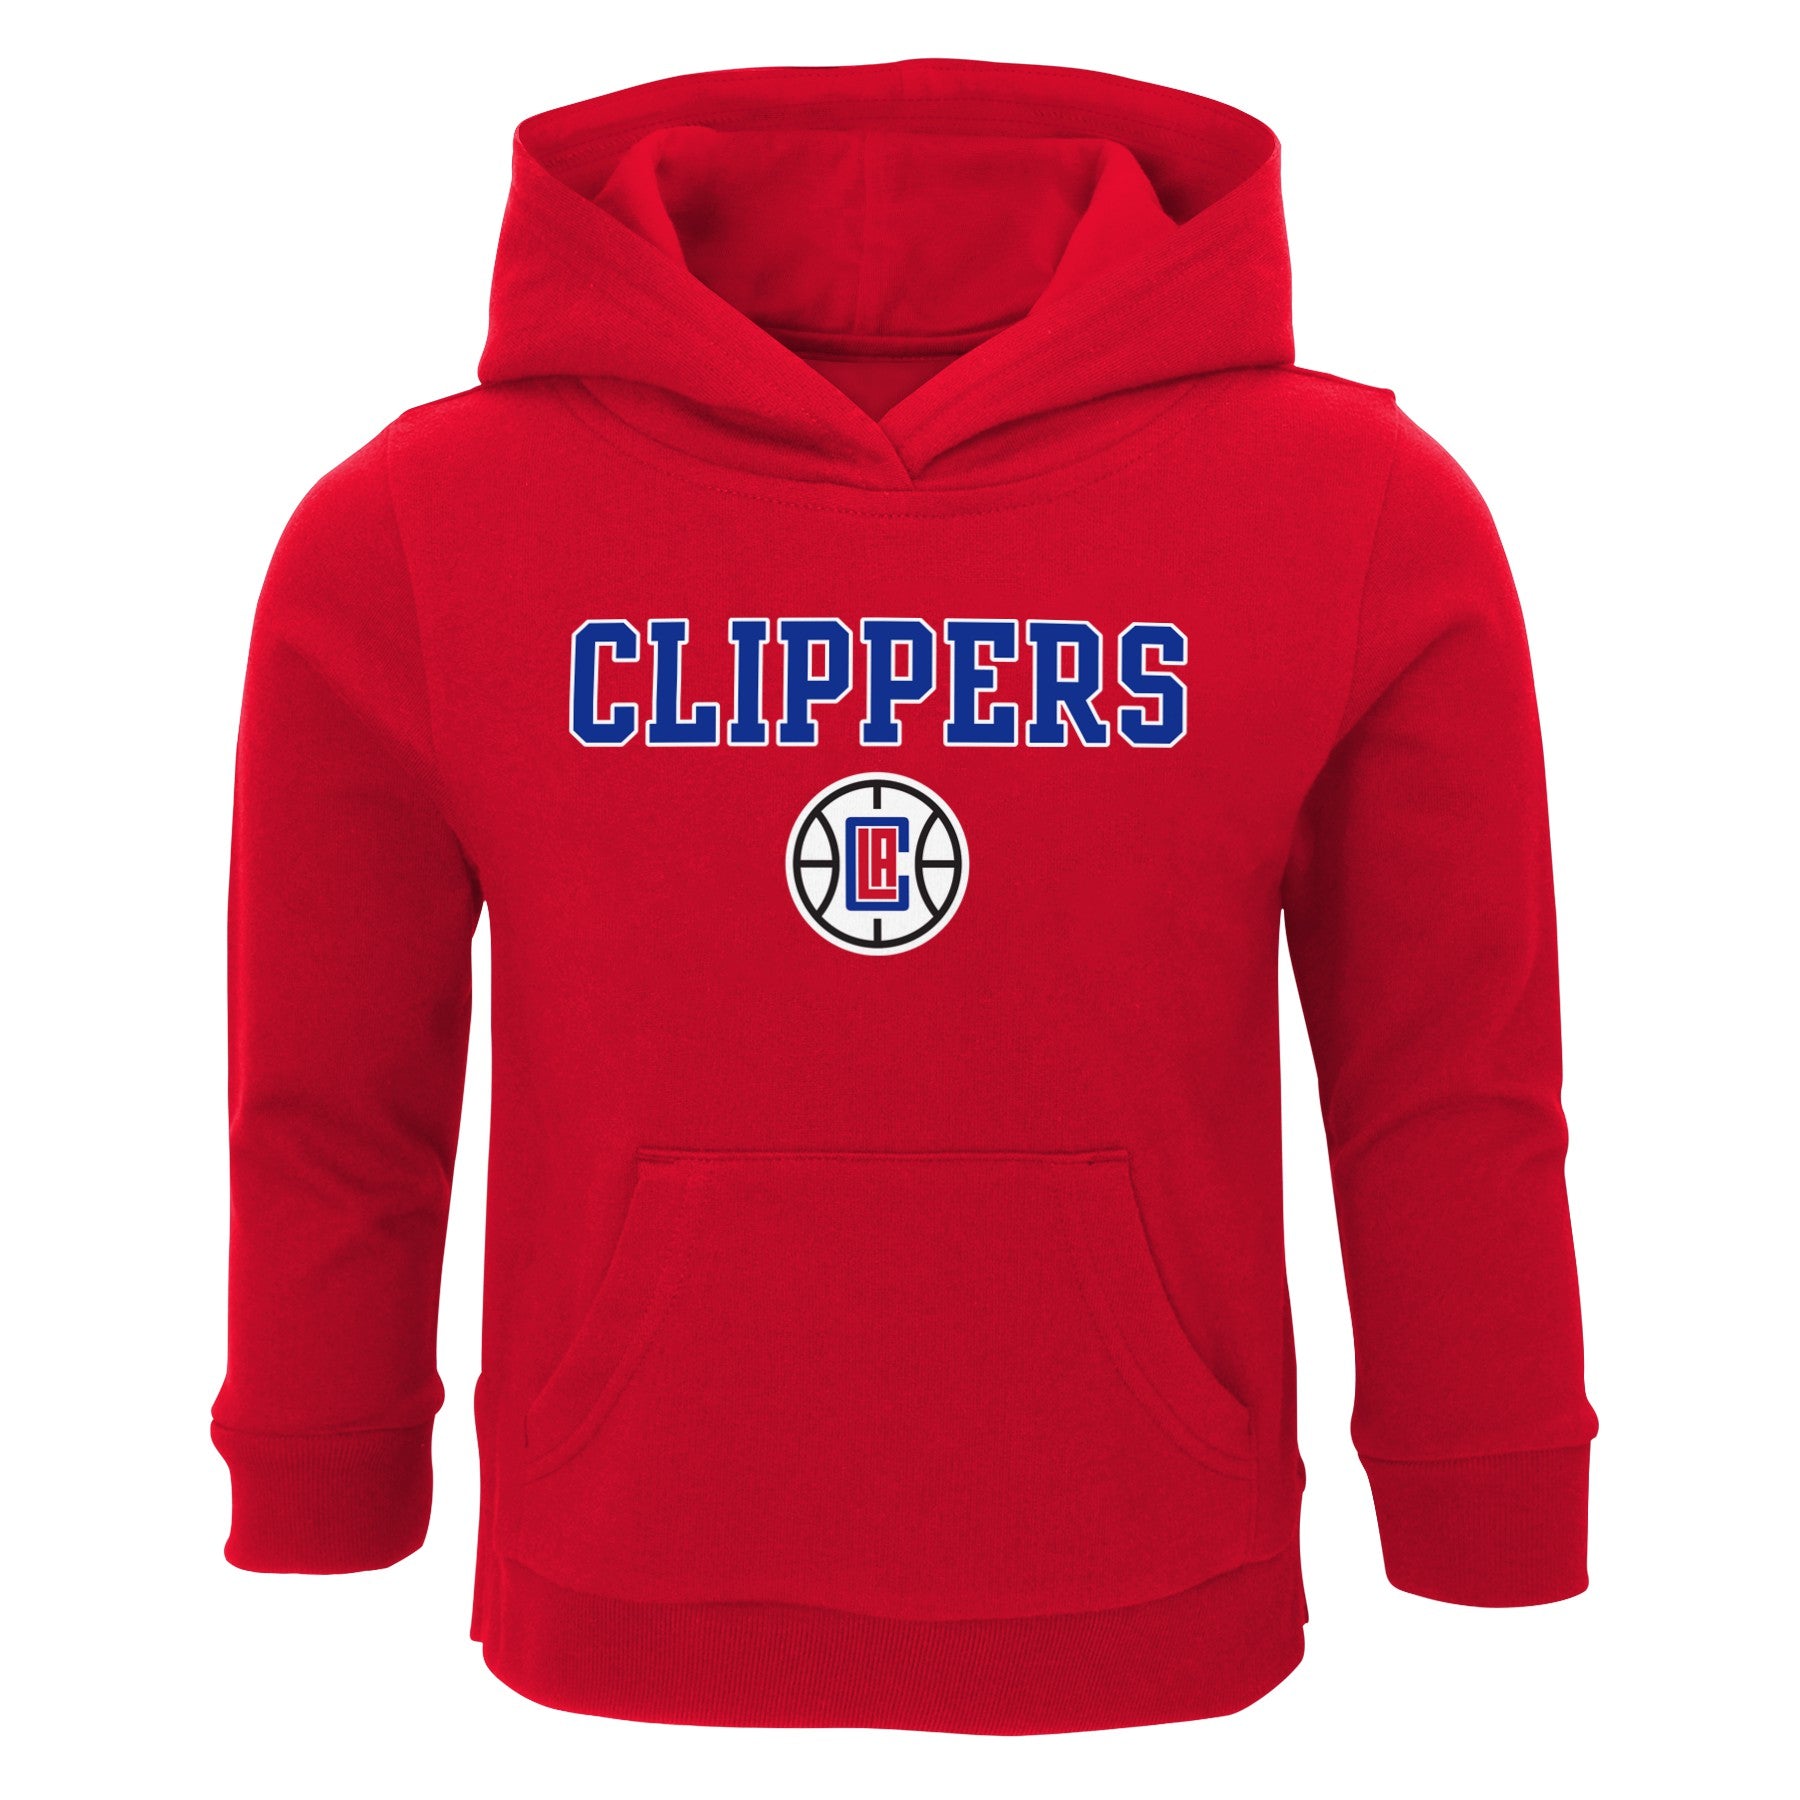 Outerstuff NBA Toddlers Los Angeles Clippers Long Sleeve Fleece